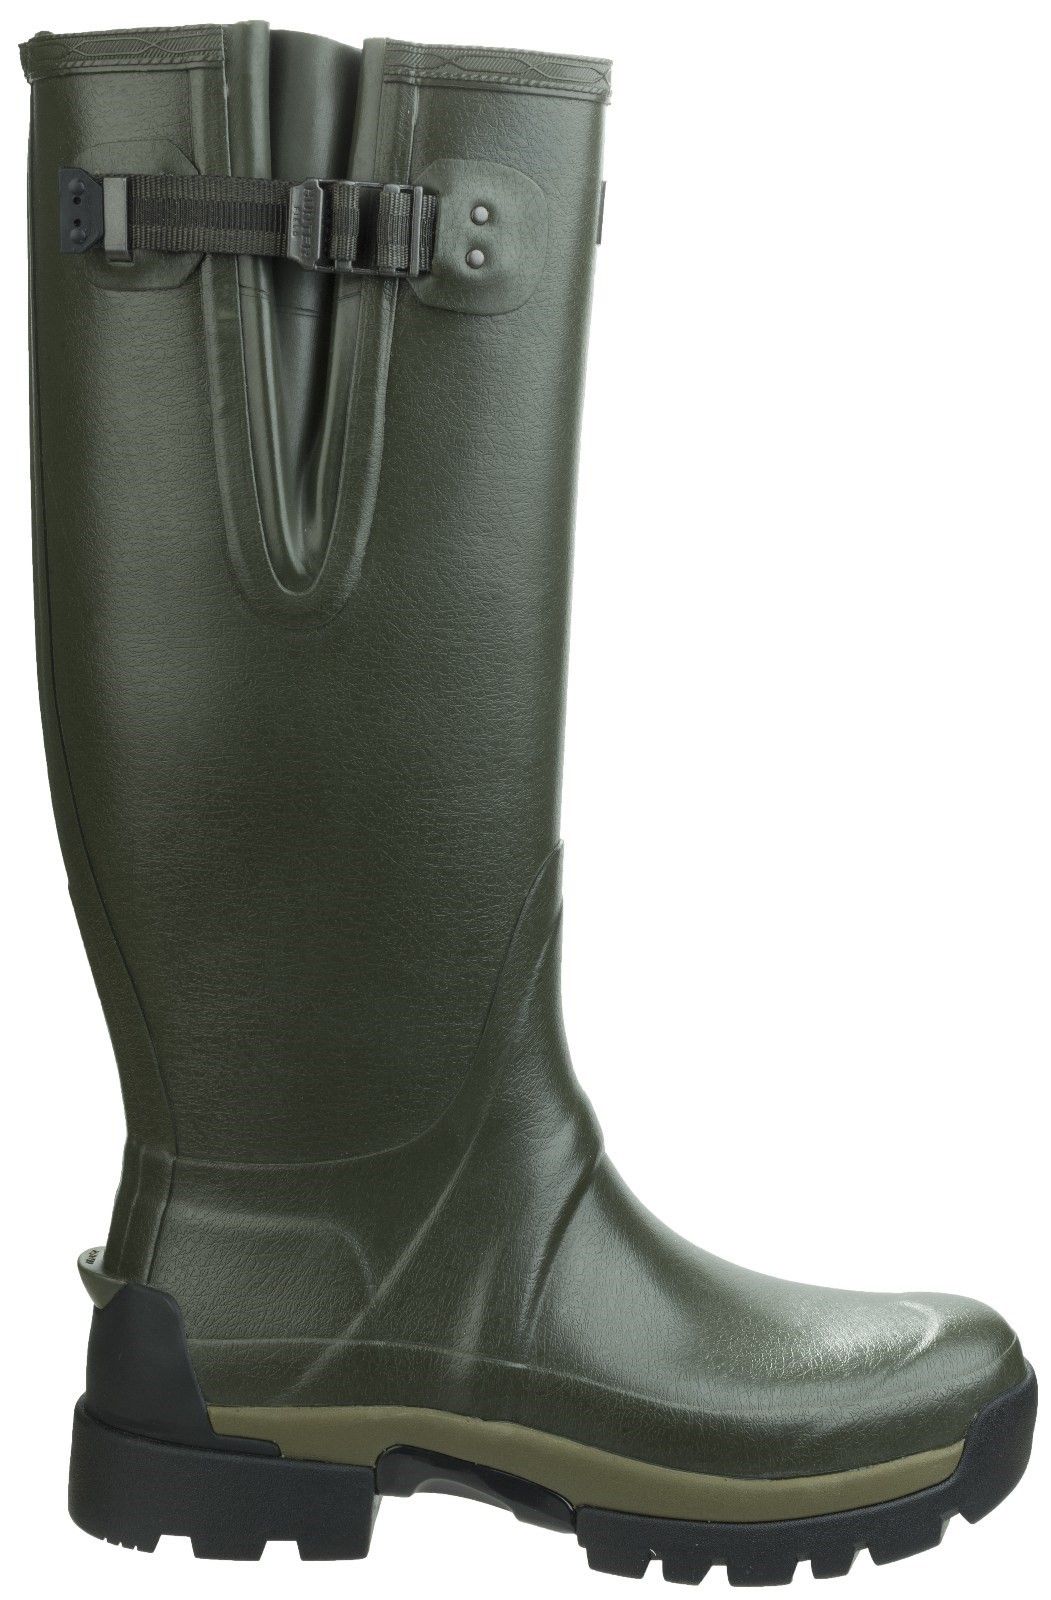 Built with specialised technical elements, the boot is handcrafted from a new soft rubber compound, featuring an adjustable side gusset to adapt the fit of the leg and a 3mm neoprene lining for insulation. This is a performance style with high durability. 
Handcrafted. 
Waterproof. 
Performance Vibram outsole. 
Adjustable gusset at the leg.